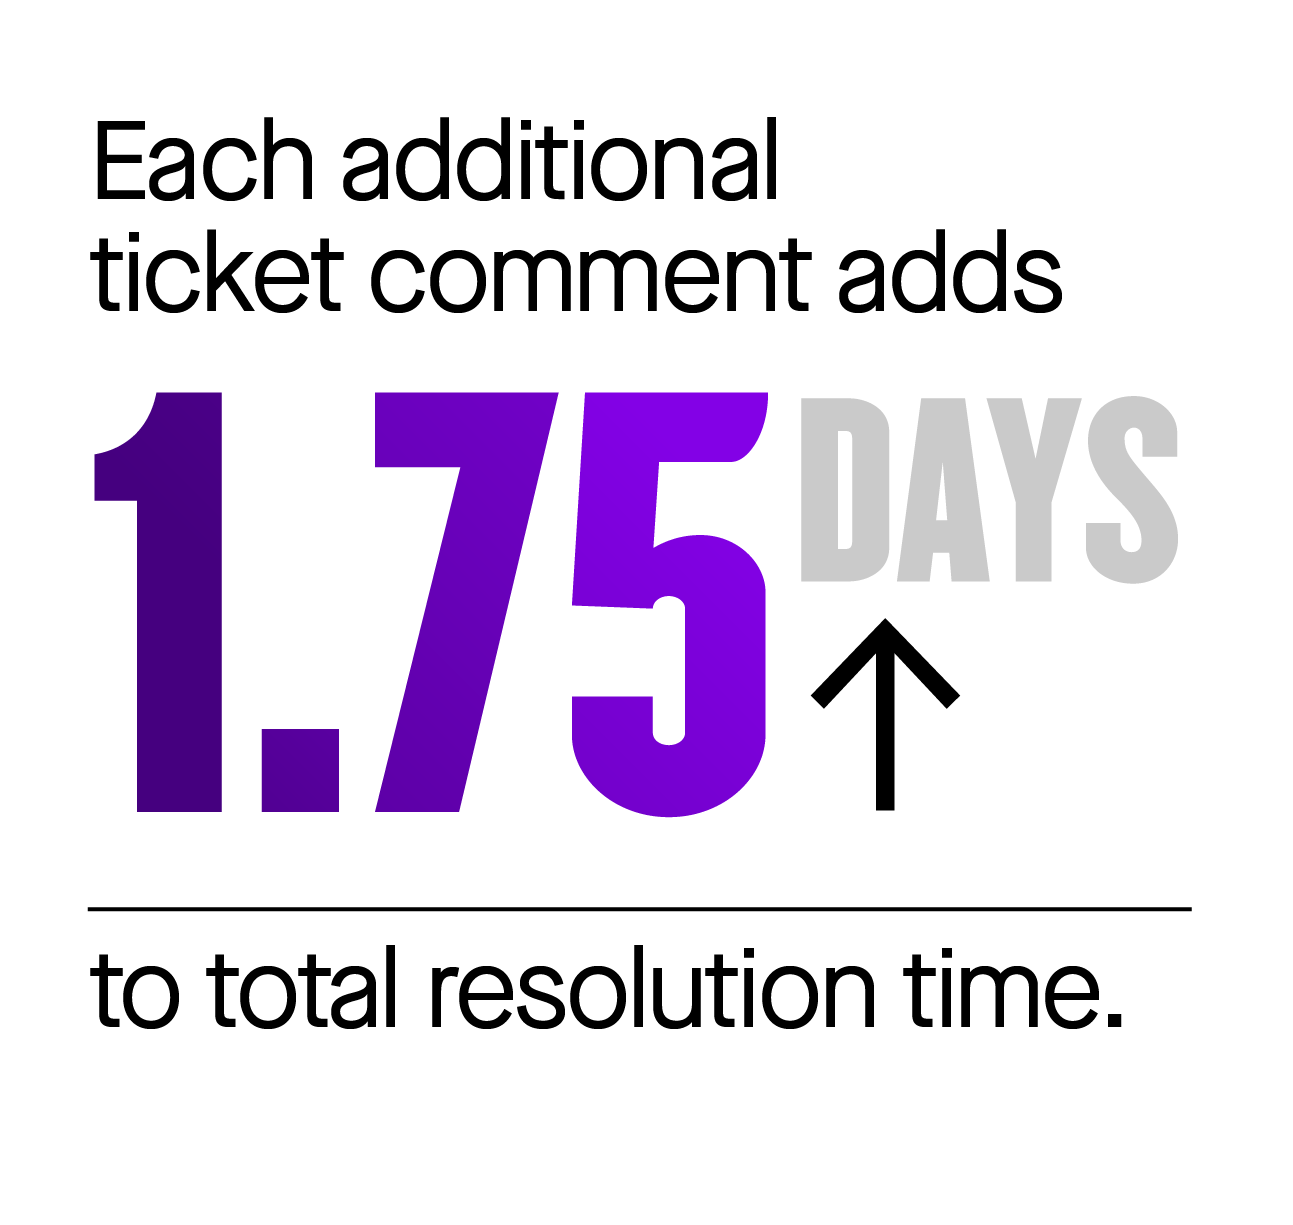 additional ticket comments add 1.75 days to resolution time